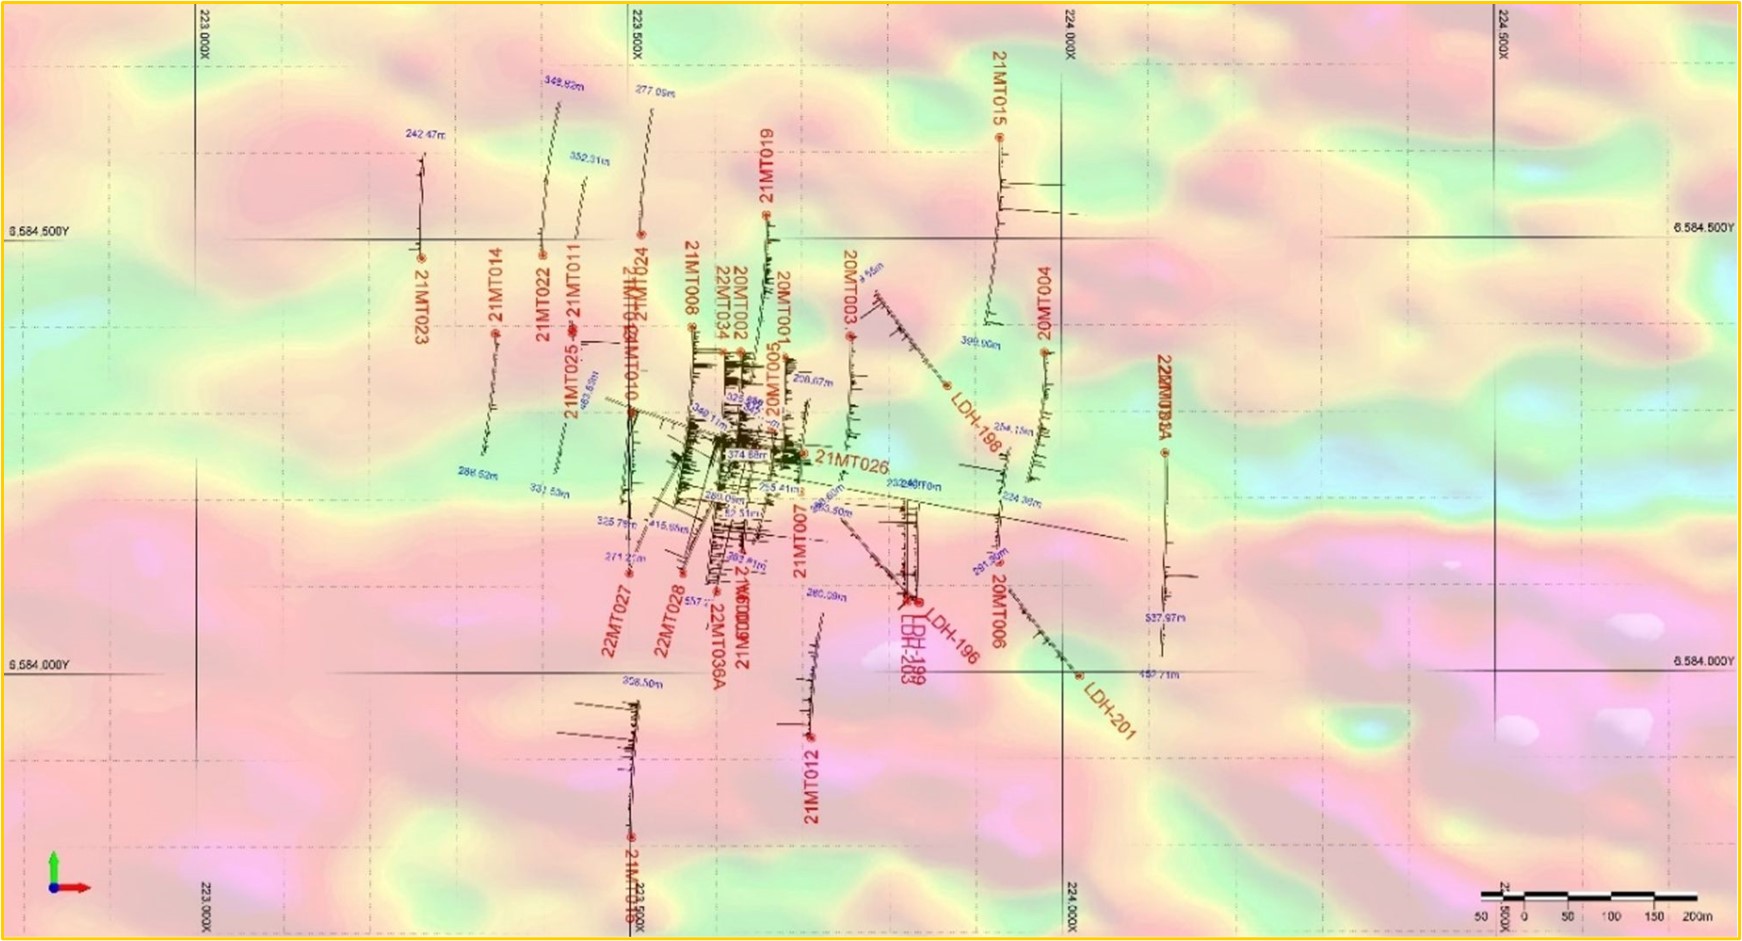 Plan map of Matilde gold discovery showing location of drill holes relative to magnetic anomaly.